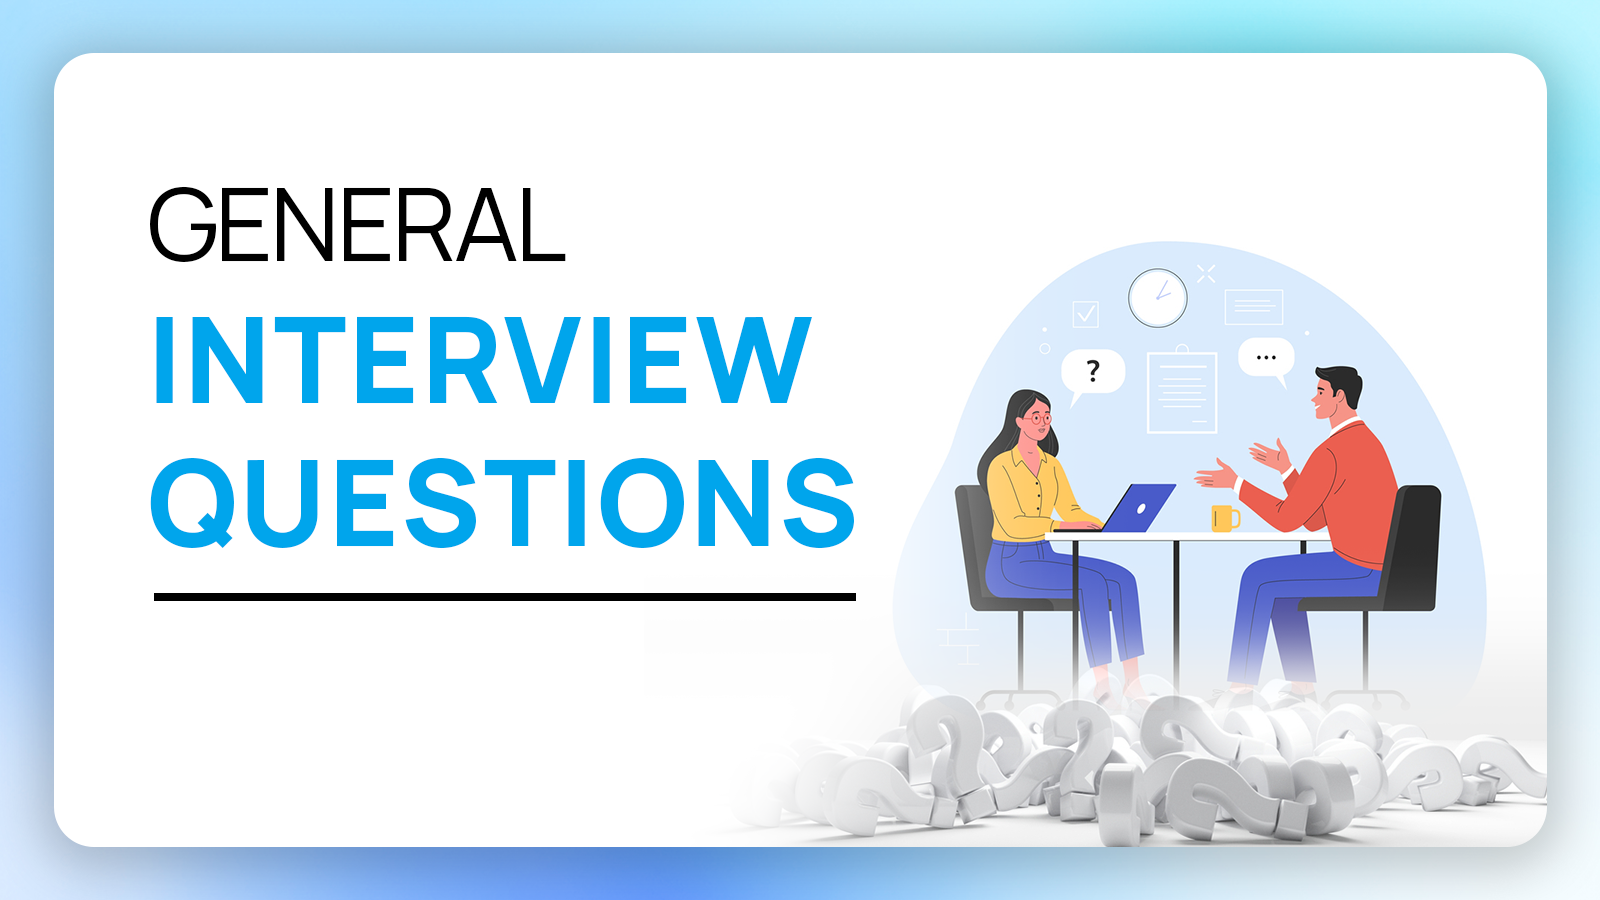 An Image of General Interview Questions